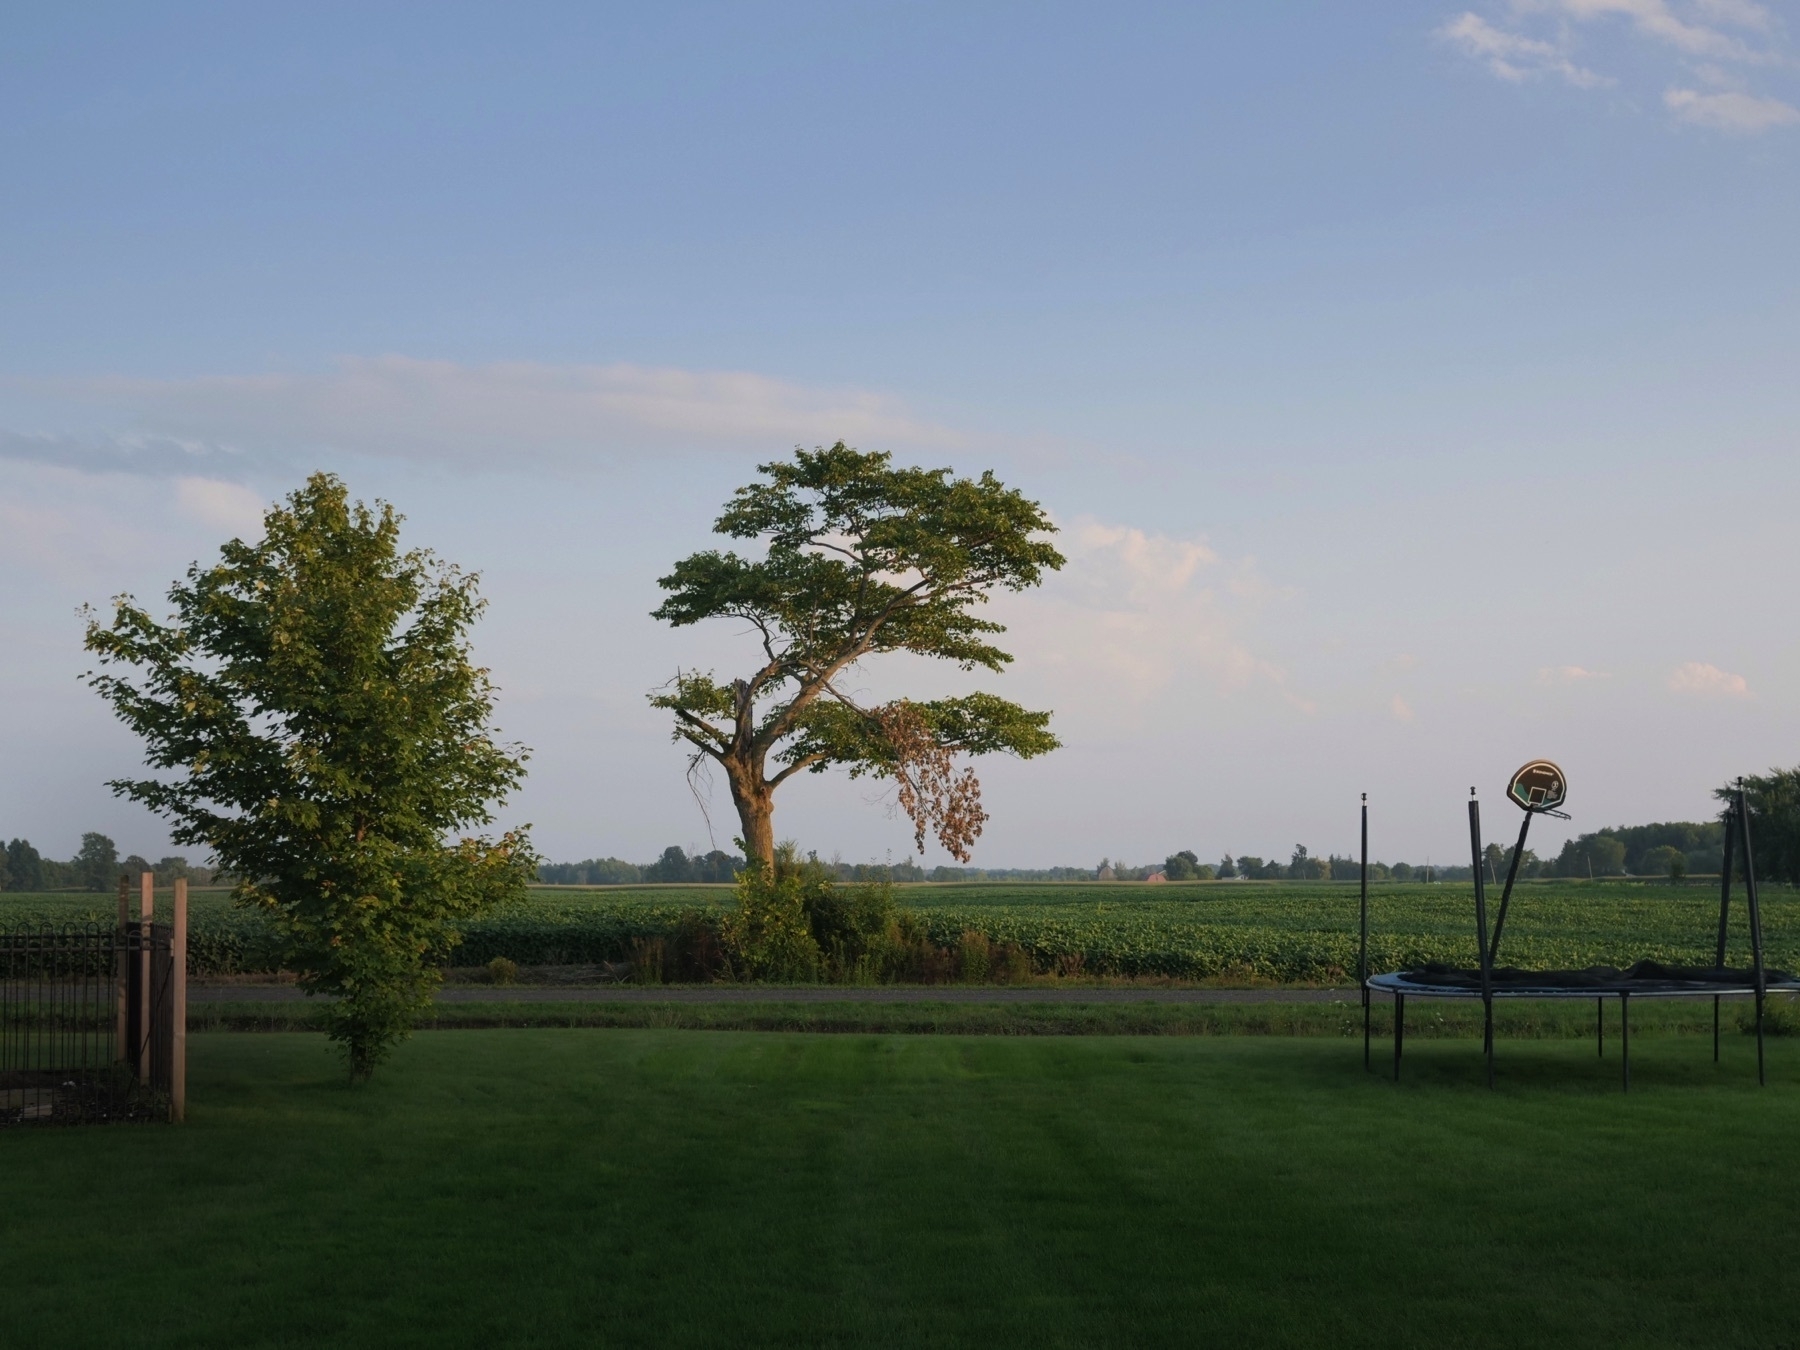 A single weather-beaten tree stands in the middle of the image, hit by the last of the evening light. To the left a fence and a smaller tree stand, to the right a trampoline with a basketball hoop that stands at an angle. A dark lawn stretches into the foreground.